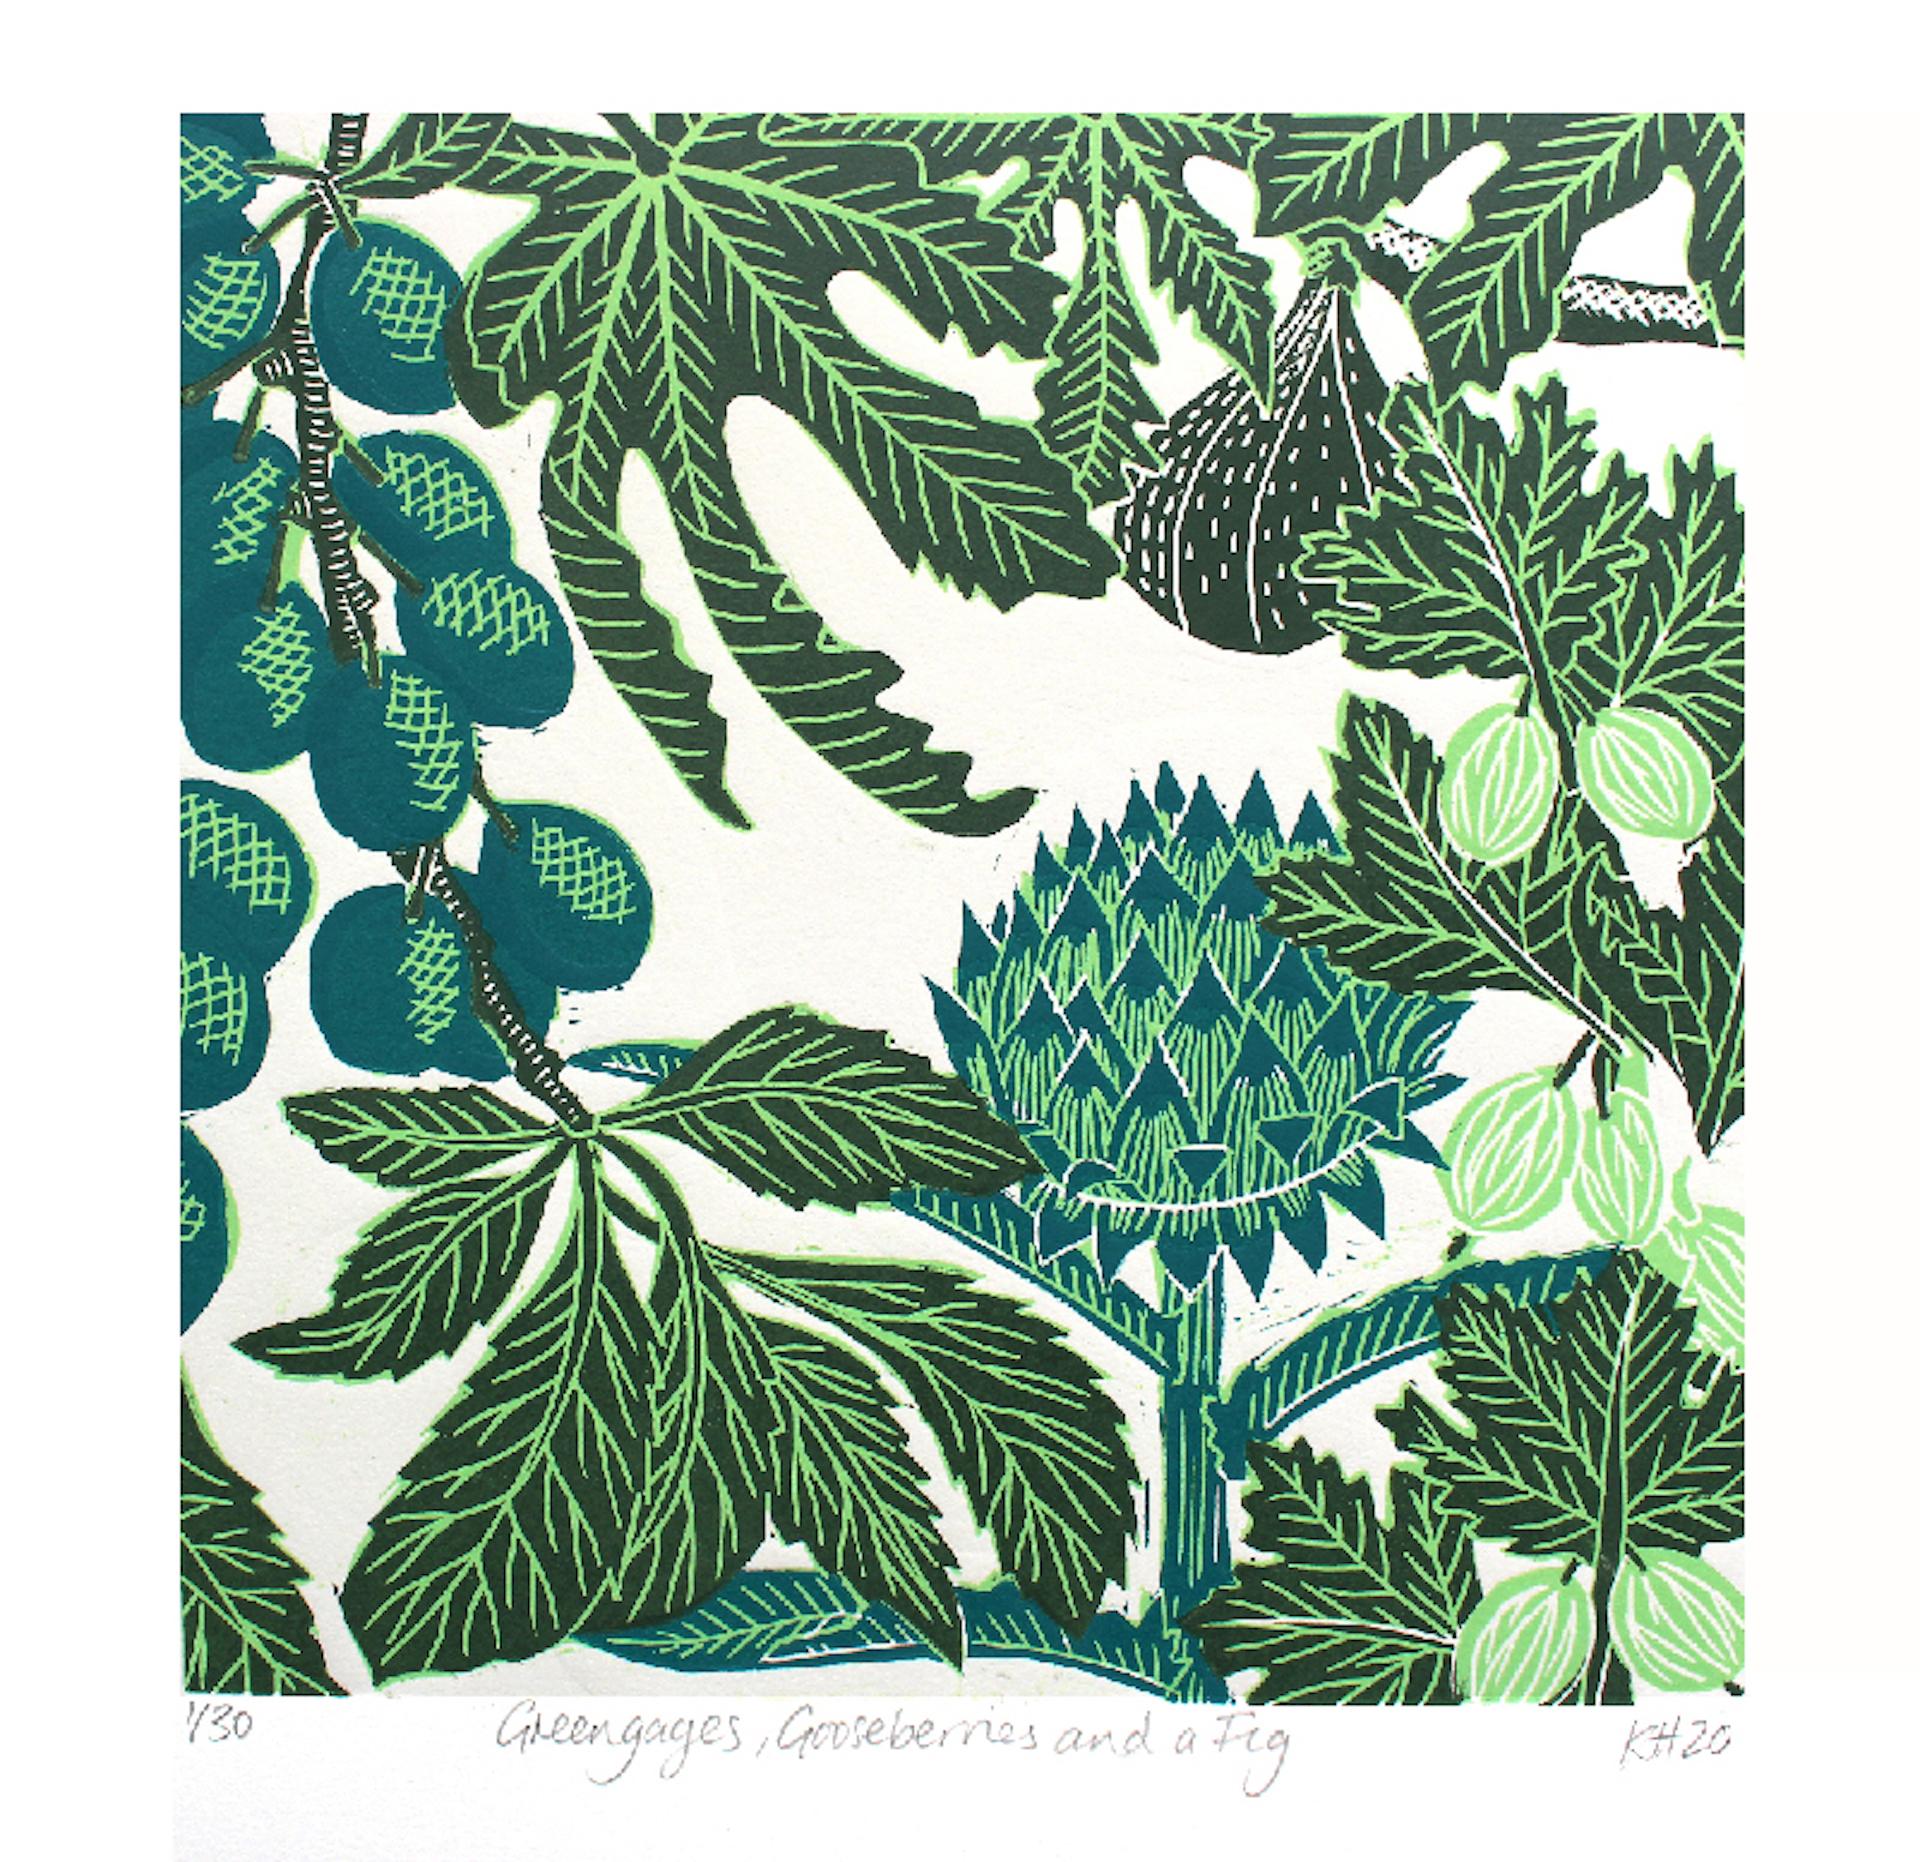 Kate Heiss, Greengages, Gooseberries and a Fig, Limited Edition Linocut Print 2